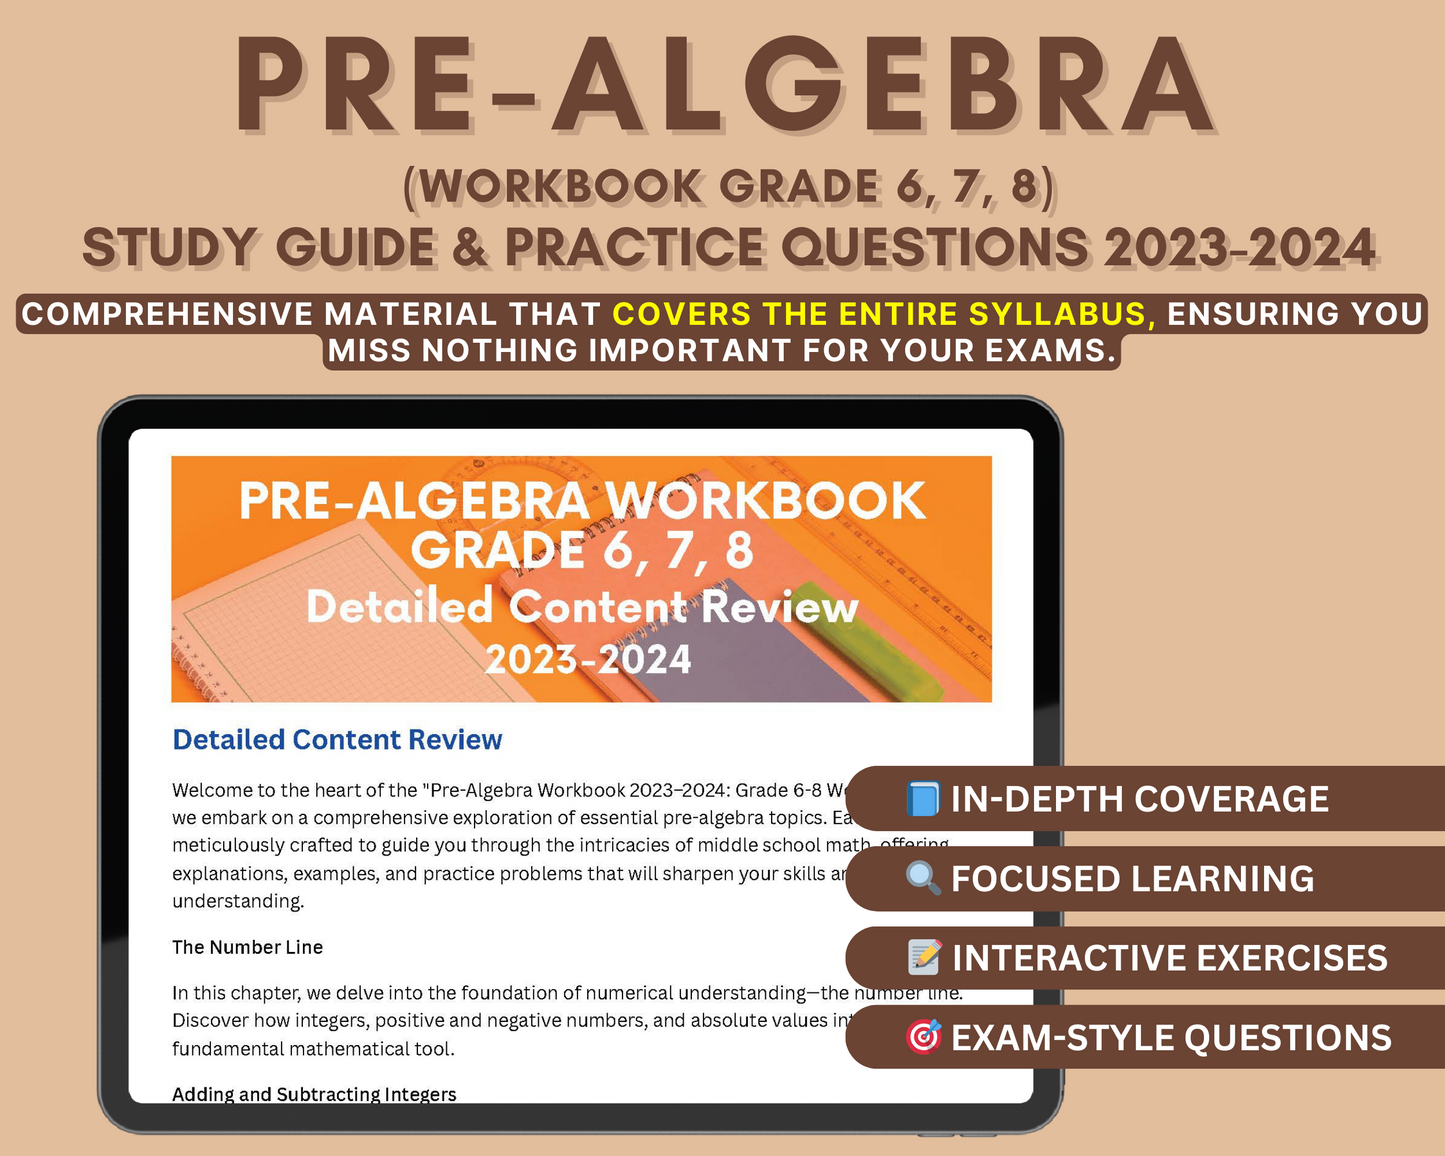 Master Middle School Math: Pre-Algebra Workbook for Grades 6, 7, 8 - In-Depth Content Review, Practice Tests & Exam Tips